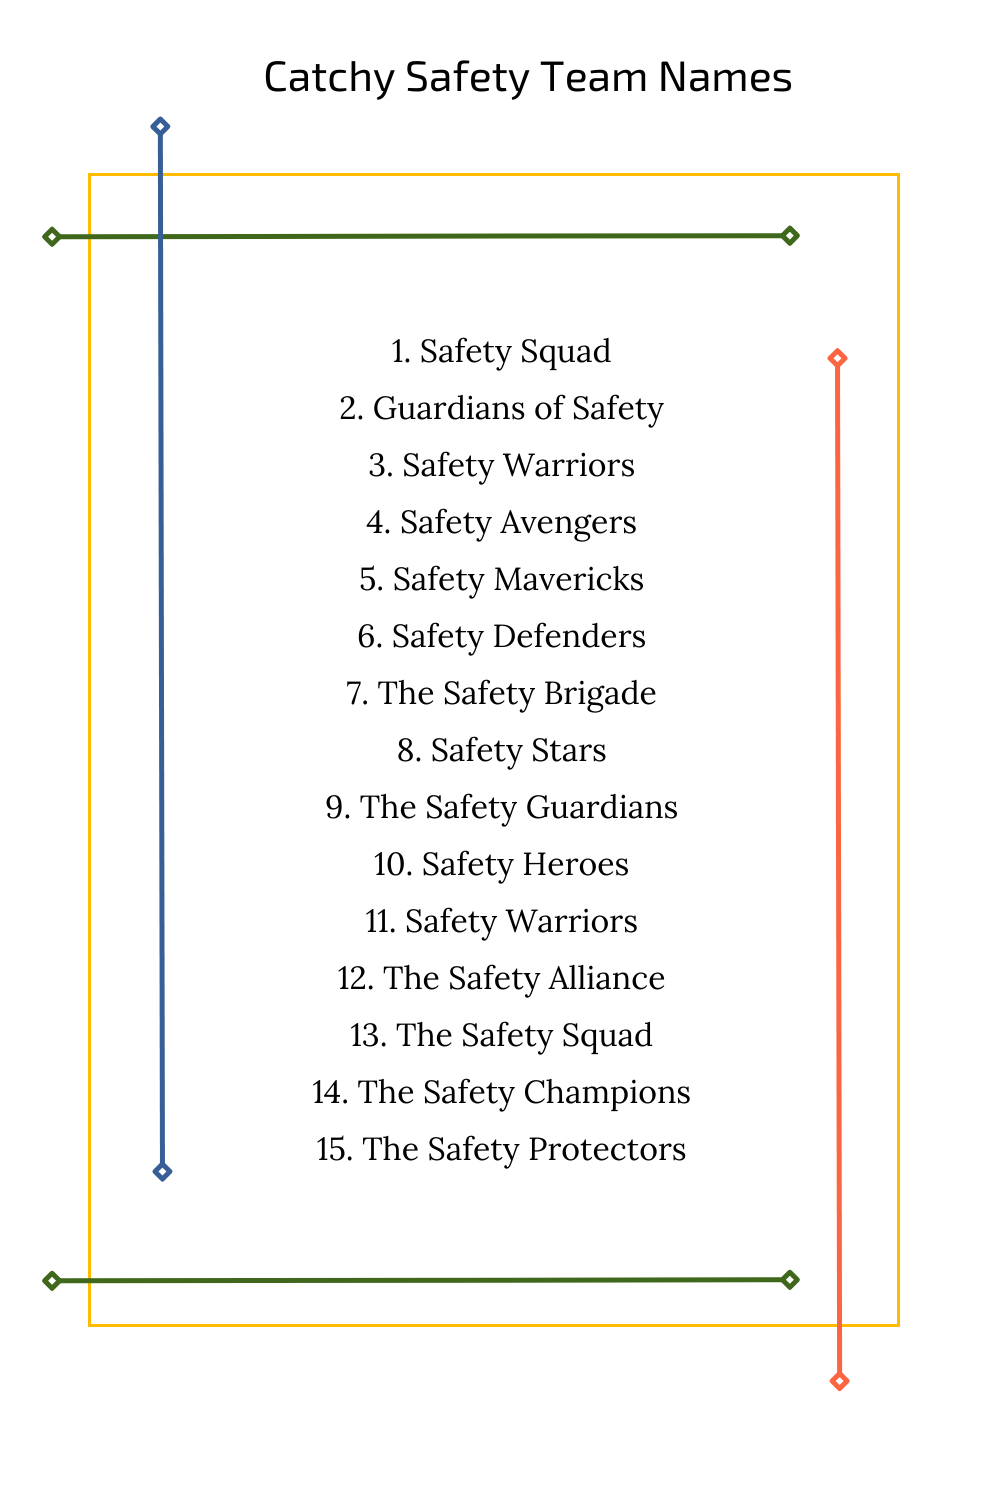 Catchy Safety Team Names